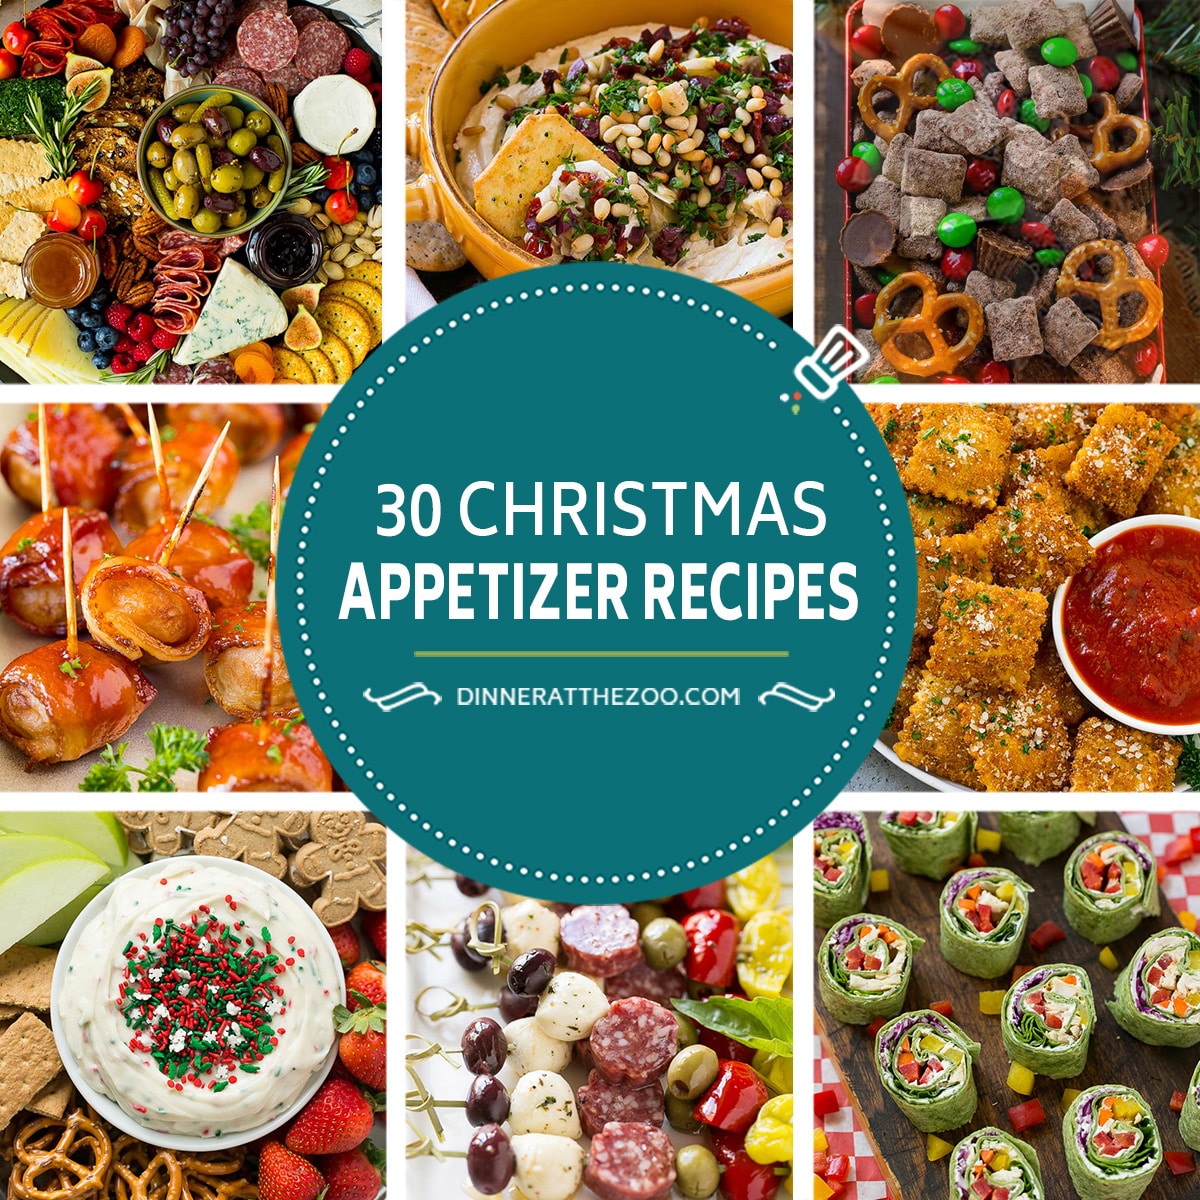 A collection of images of Christmas appetizer recipes such as veggie pinwheels, bacon wrapped water chestnuts and steak bites.